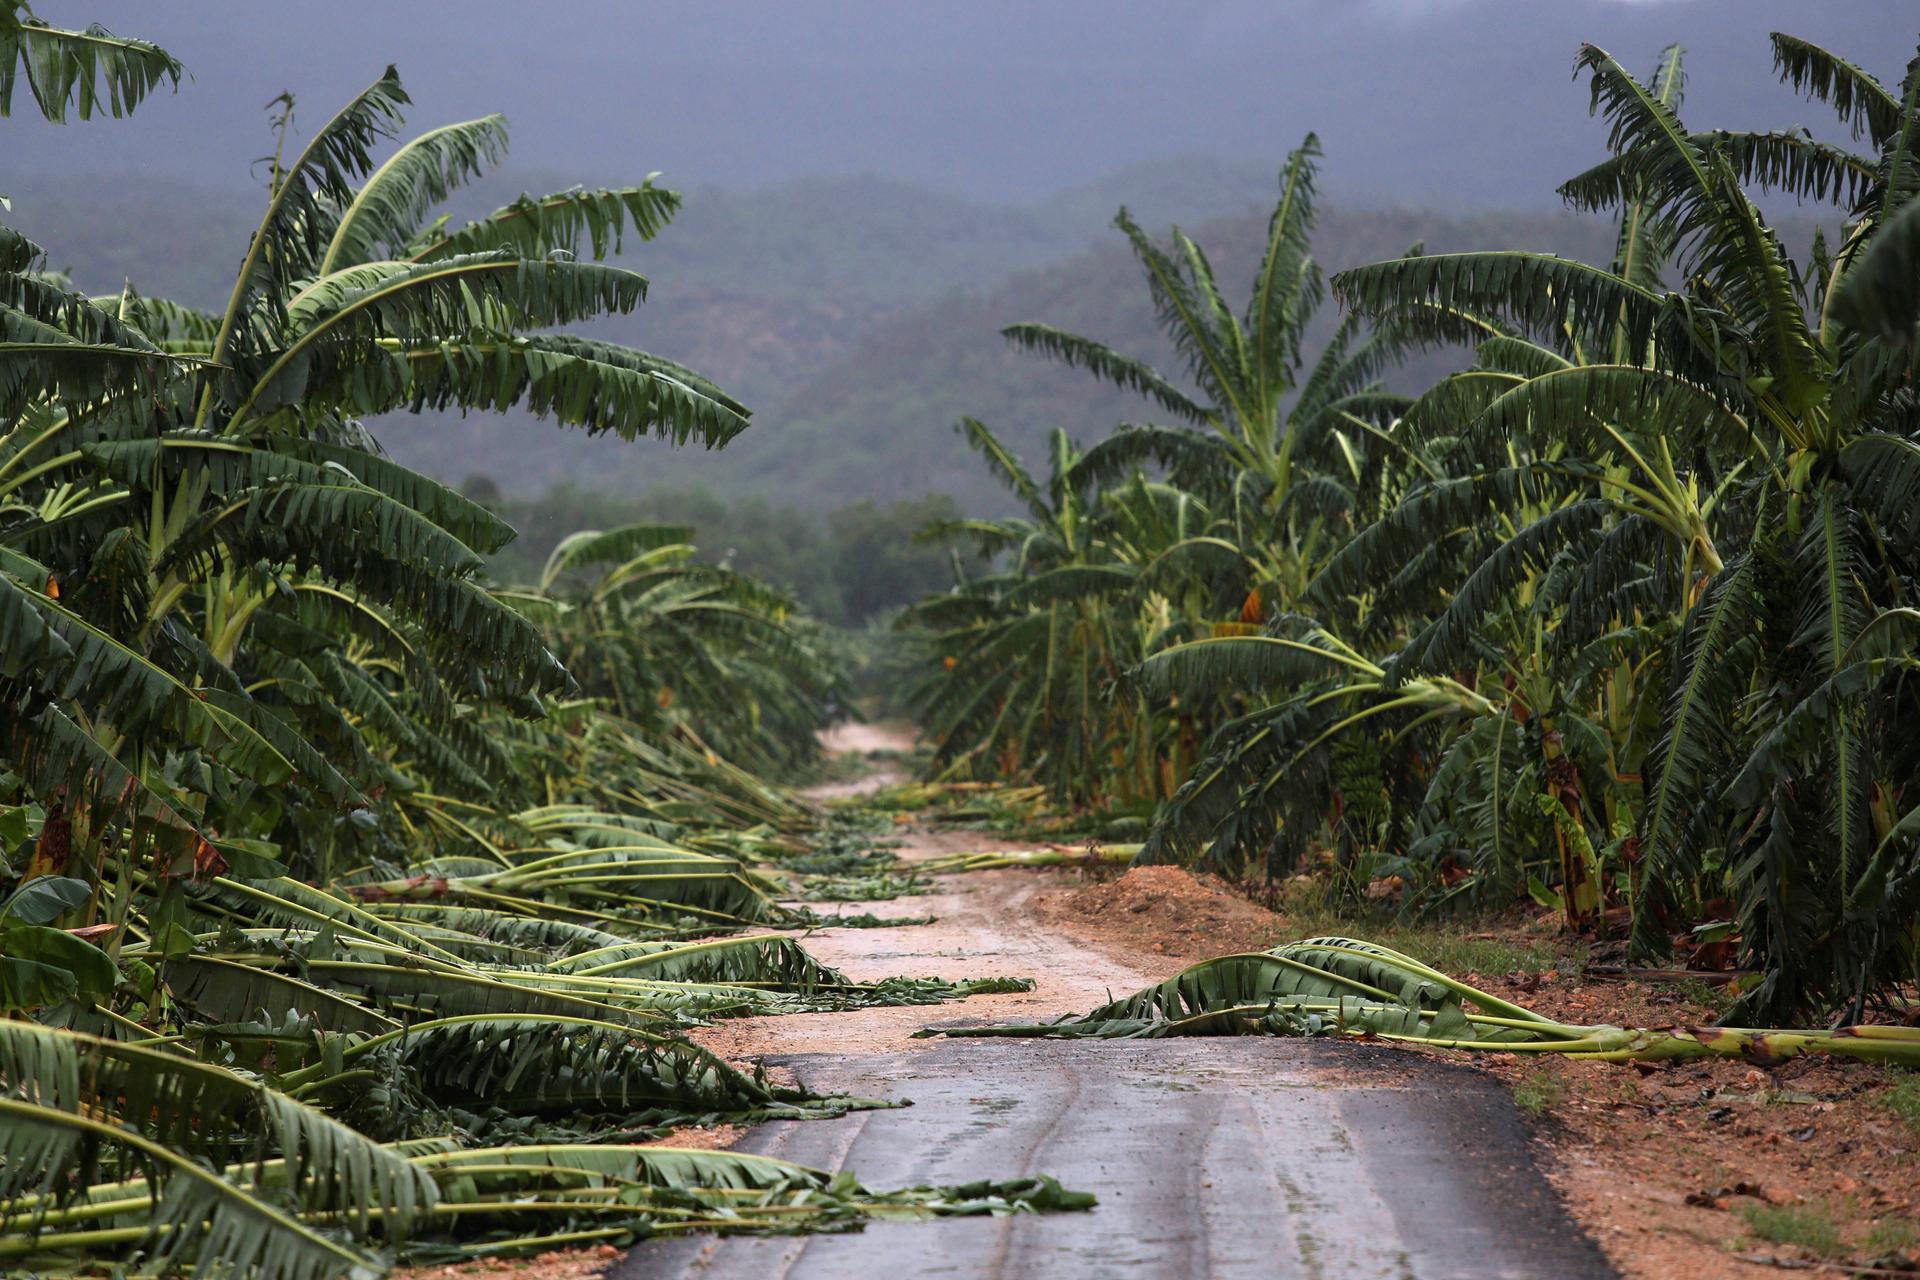 Fallen banana trees cover a roadside after the passage of Hurricane Matthew in Cuba's Guantanamo province in October, 2016.